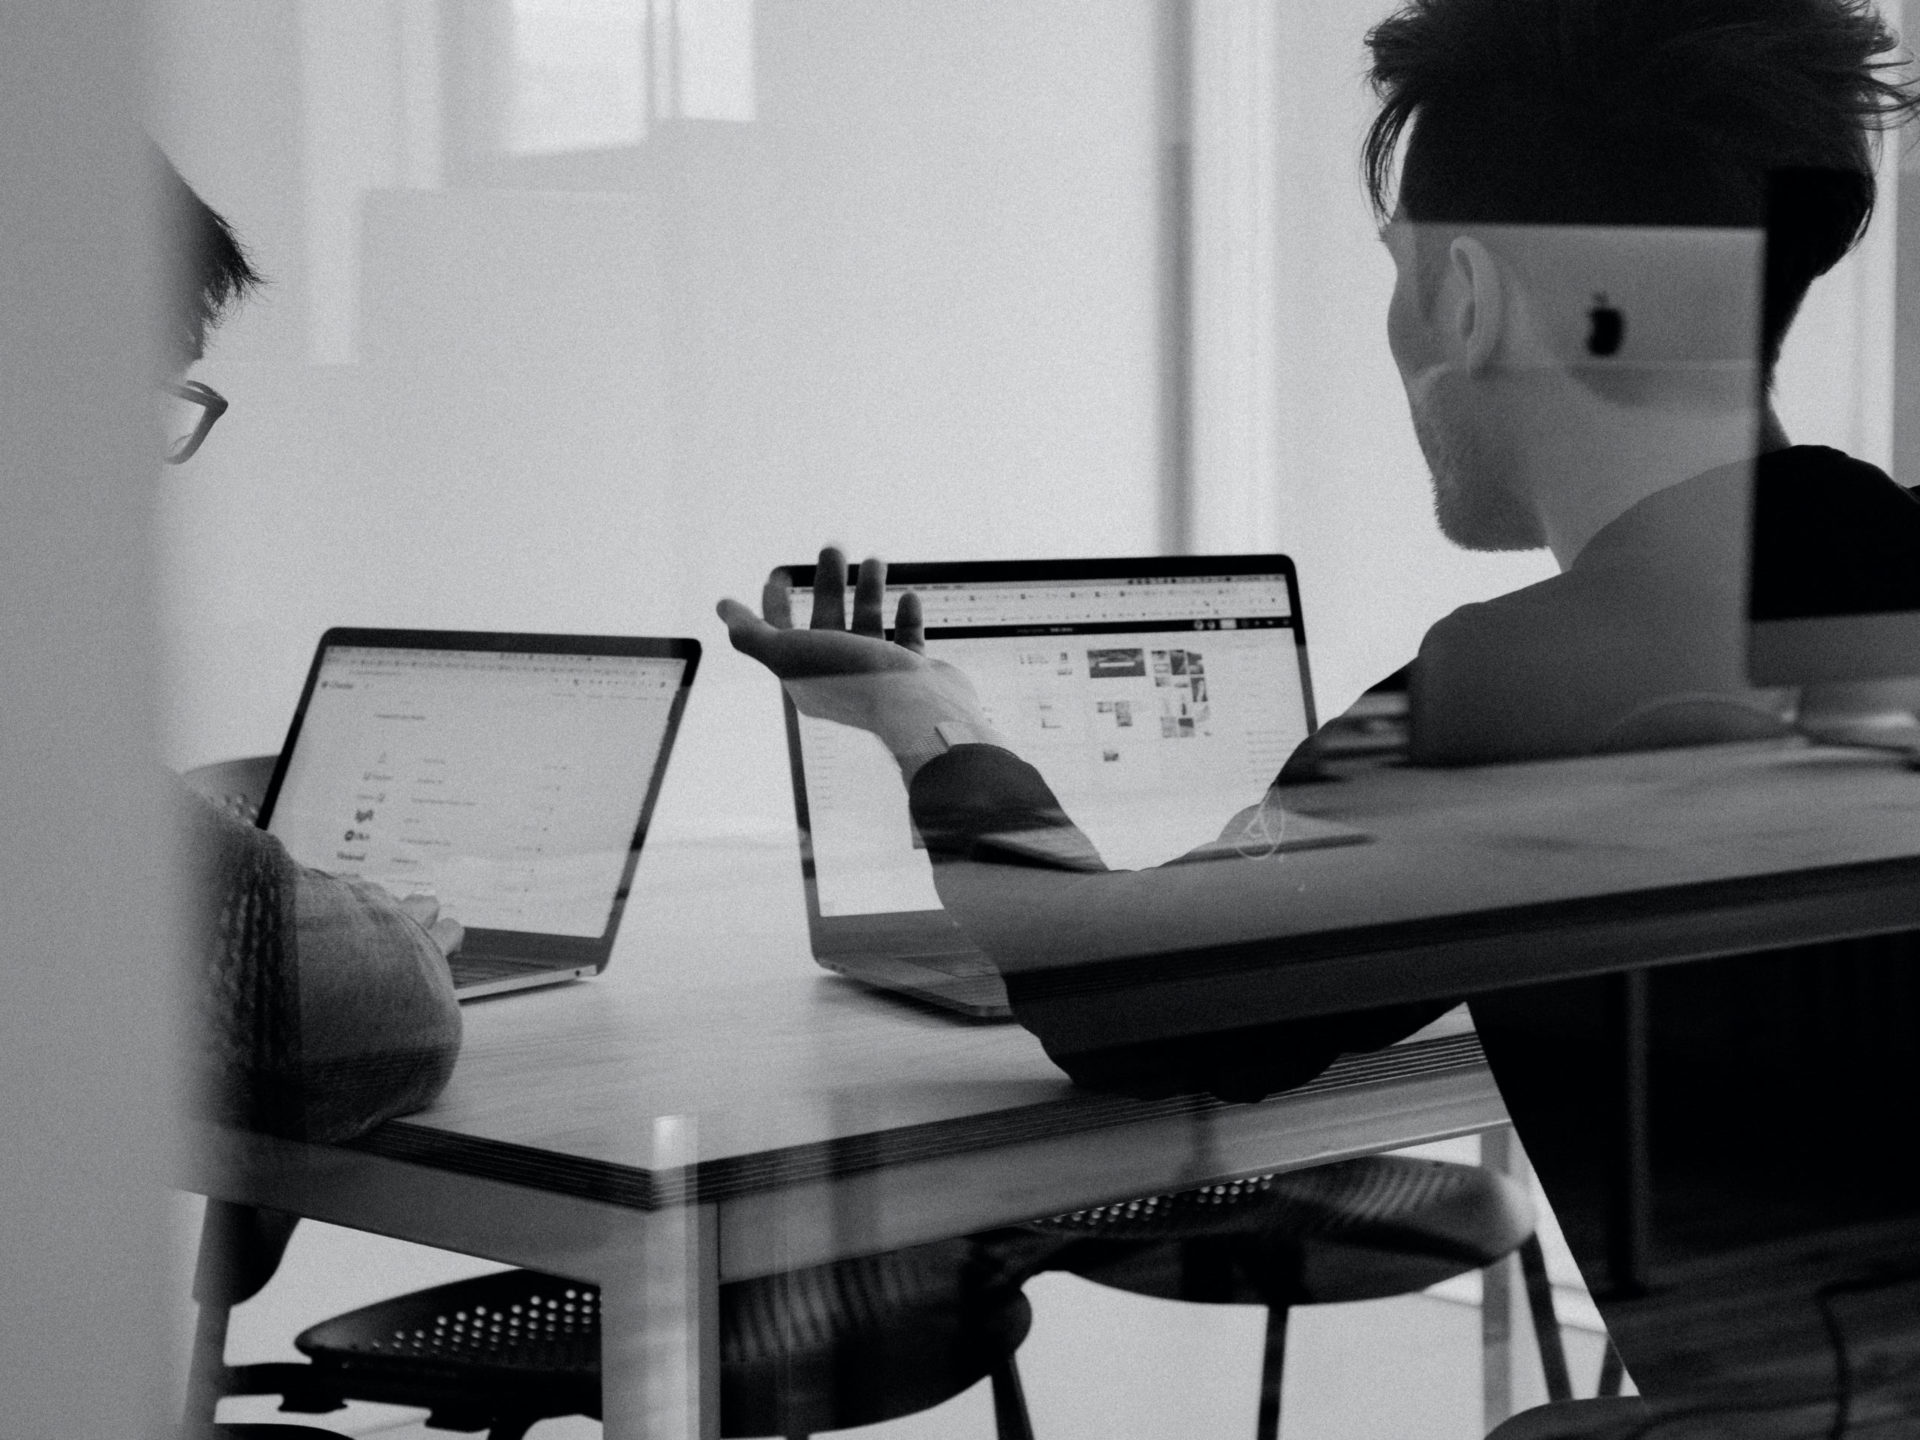 Two black and white figures sit at a table discussing things while using their laptops. There's reflection in the foreground that indicate the viewer is outside the room